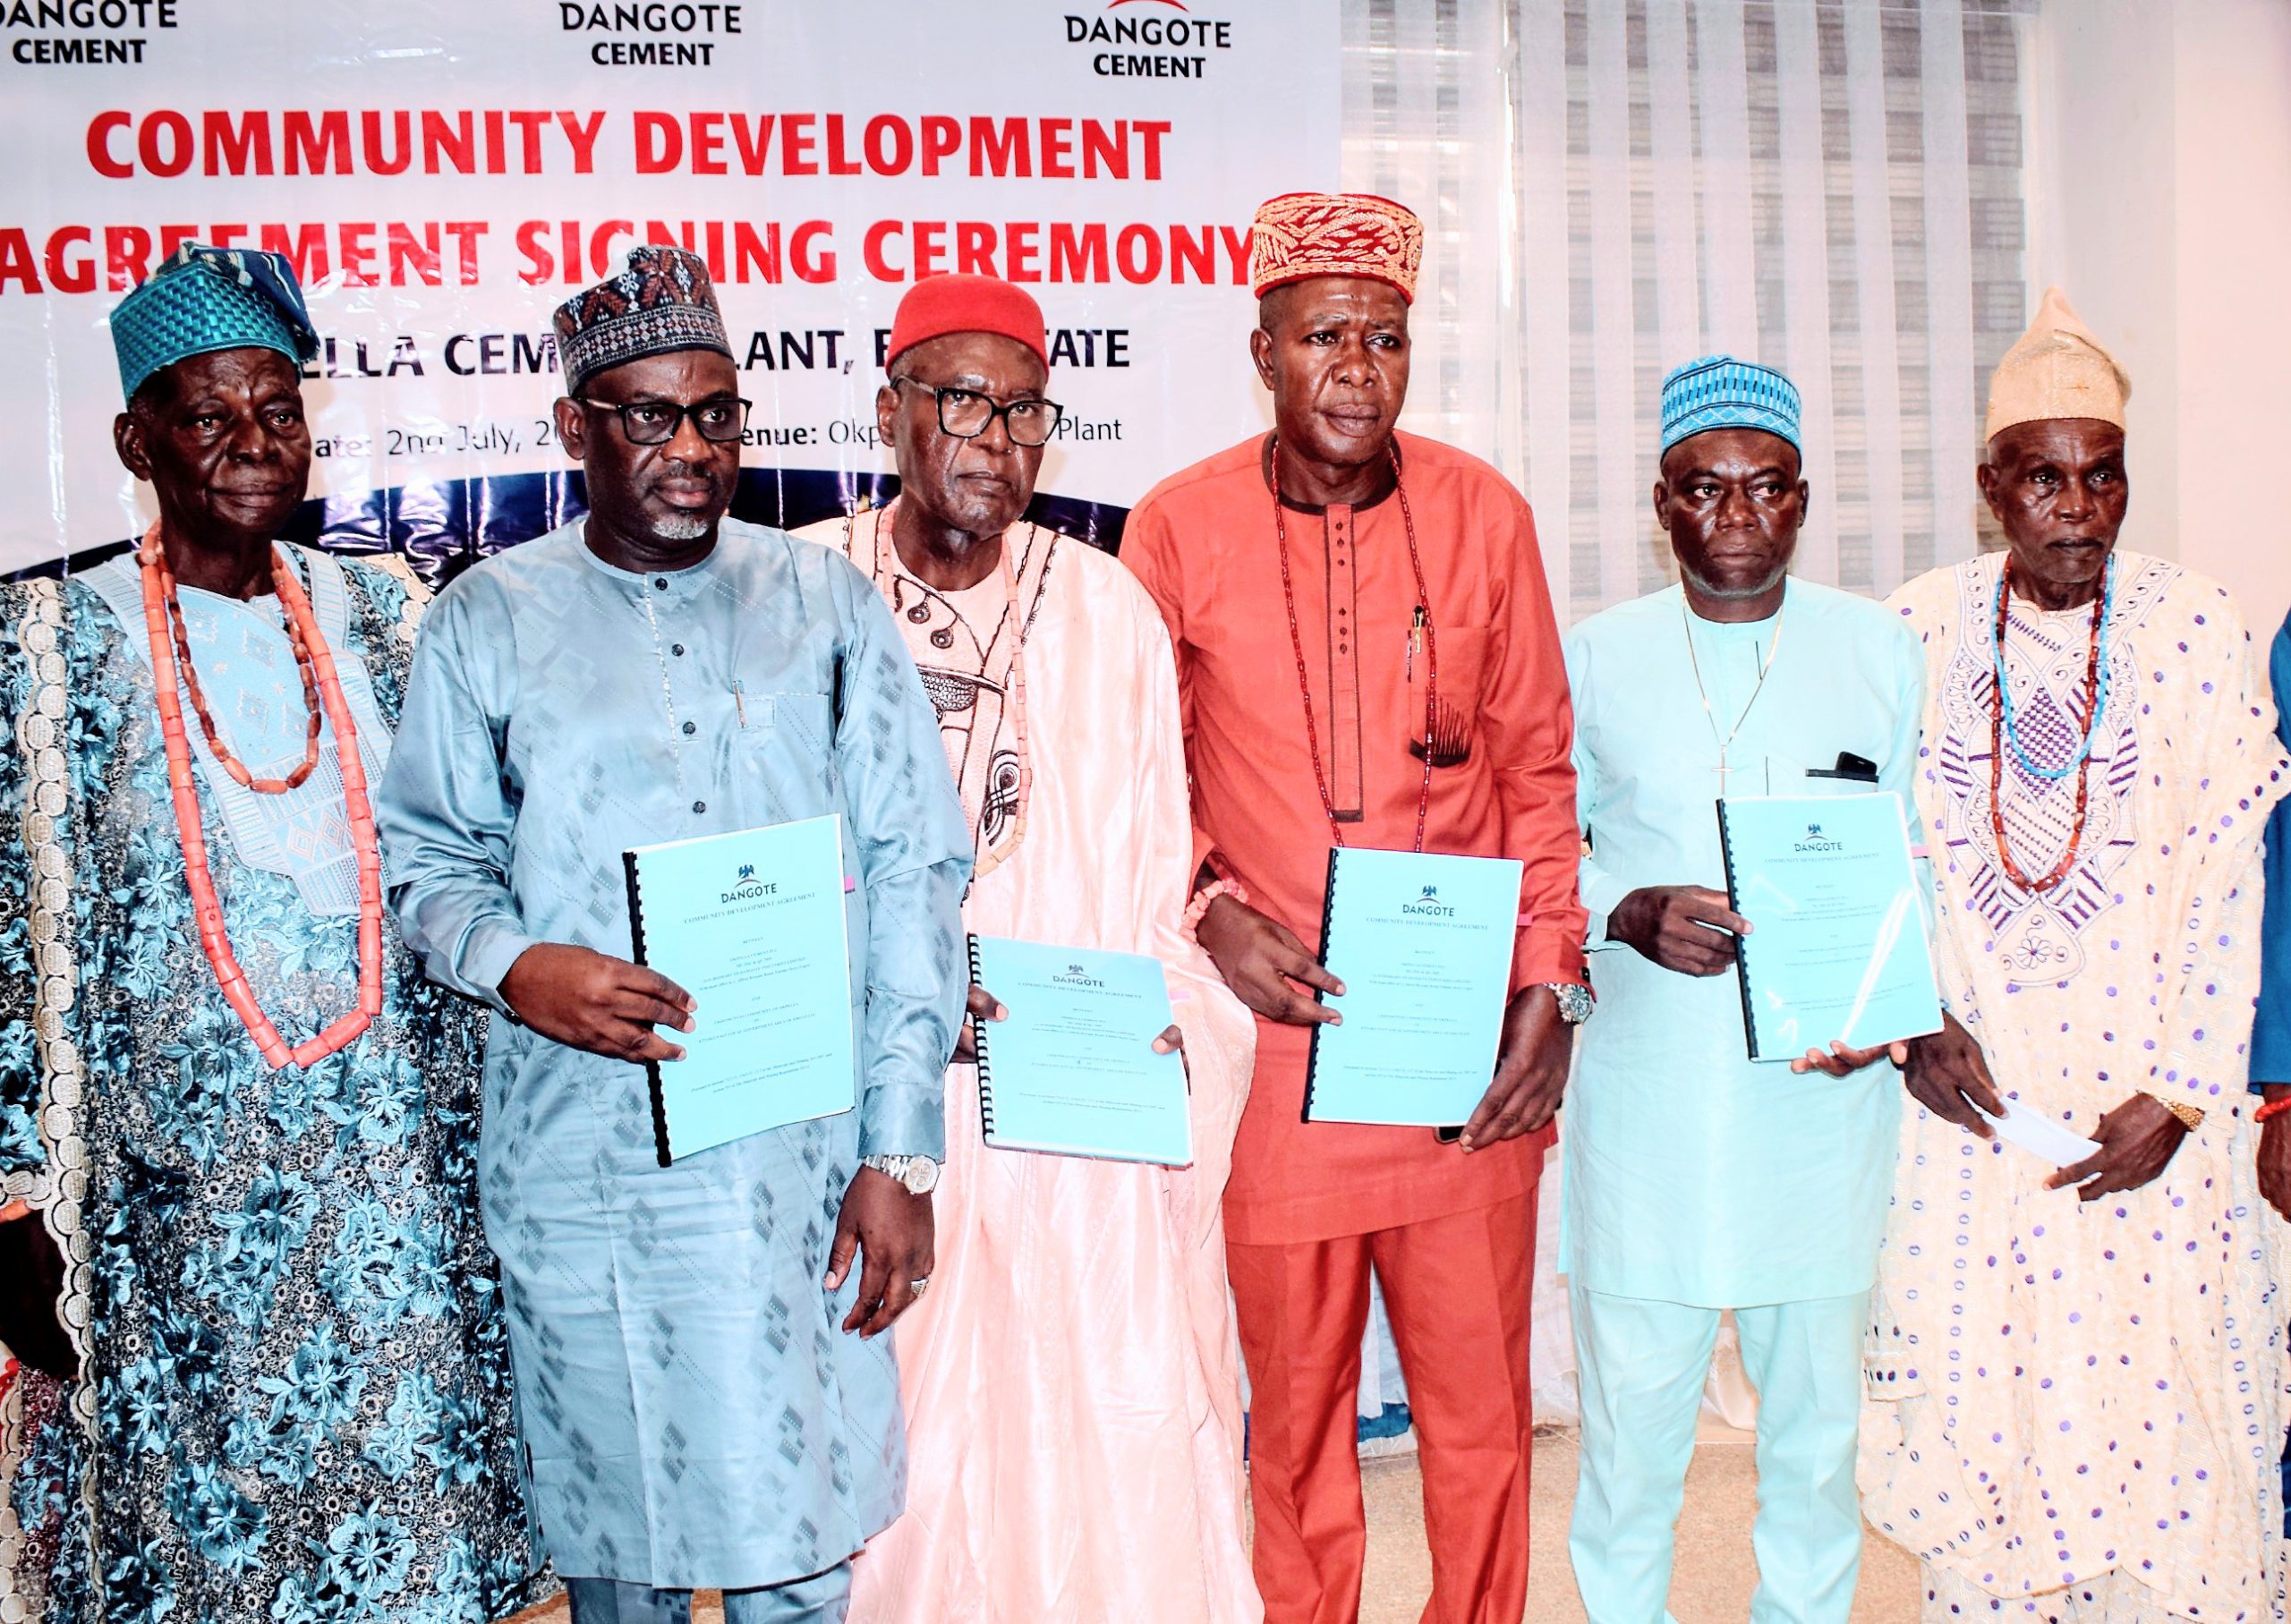 Dangote Cement Okpella commits to development, social support for Host Communities